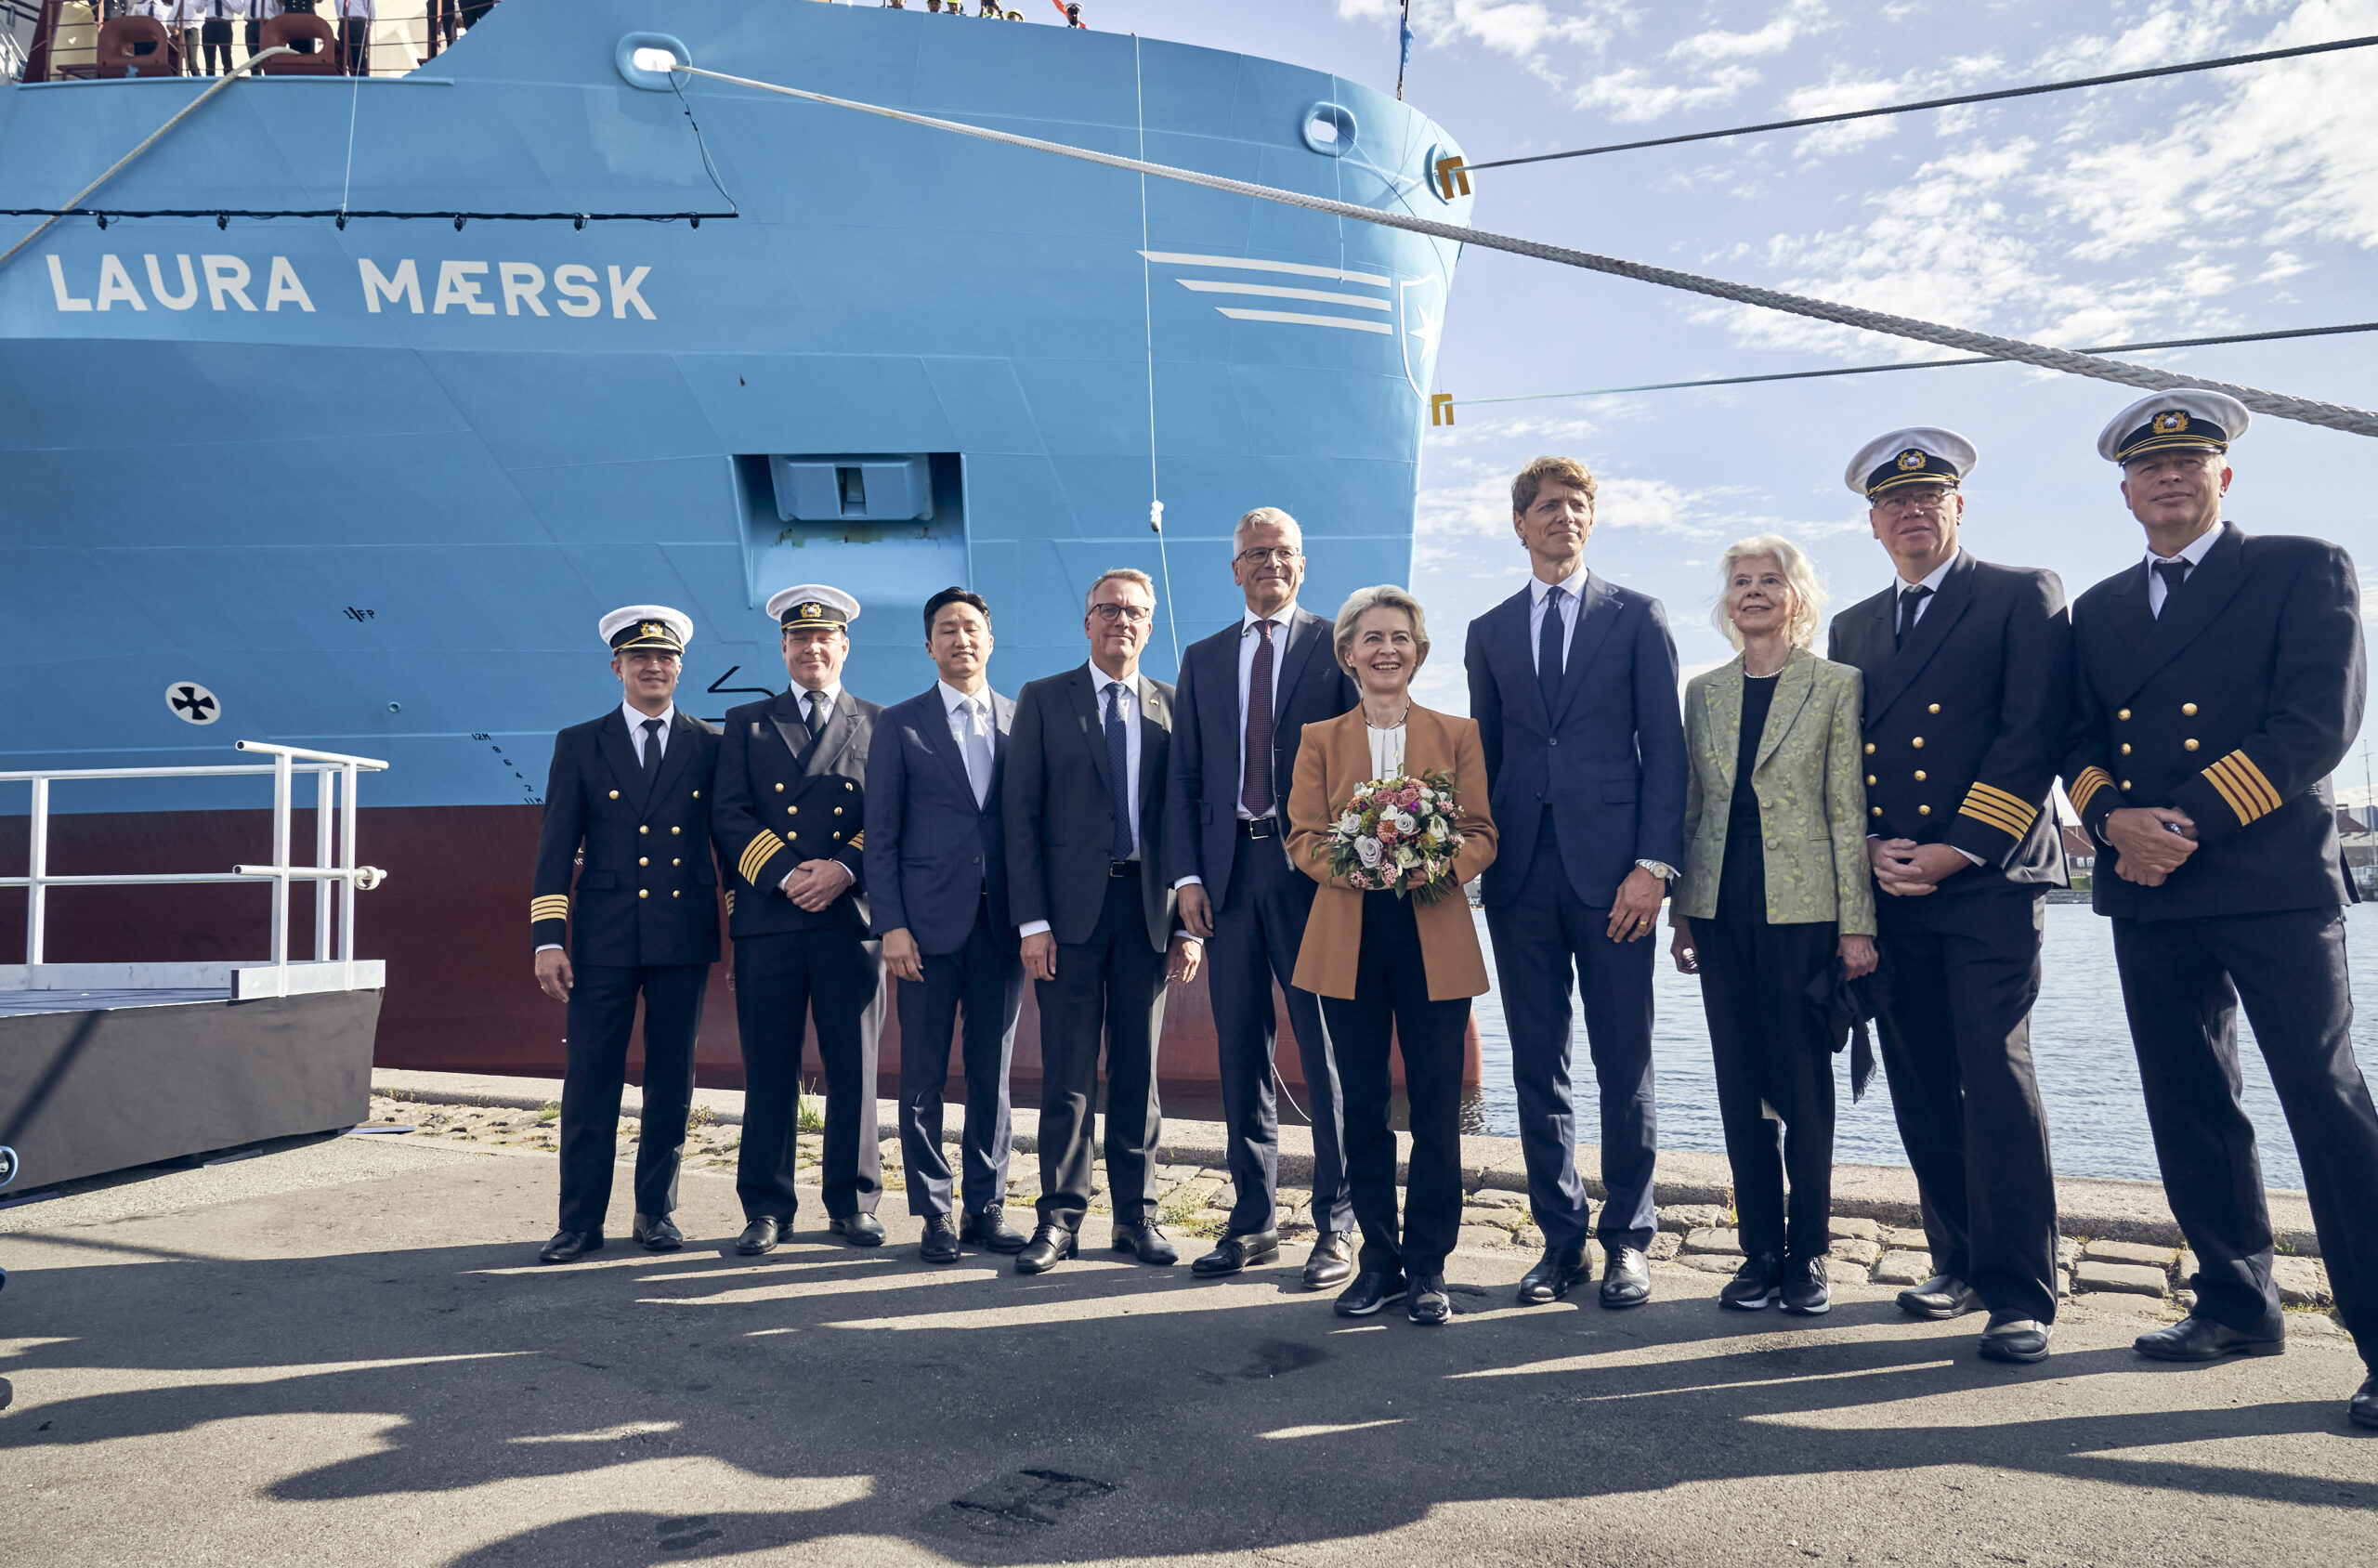 Historic Moment: Laura Mærsk Green Methanol-Powered Containership Ceremony